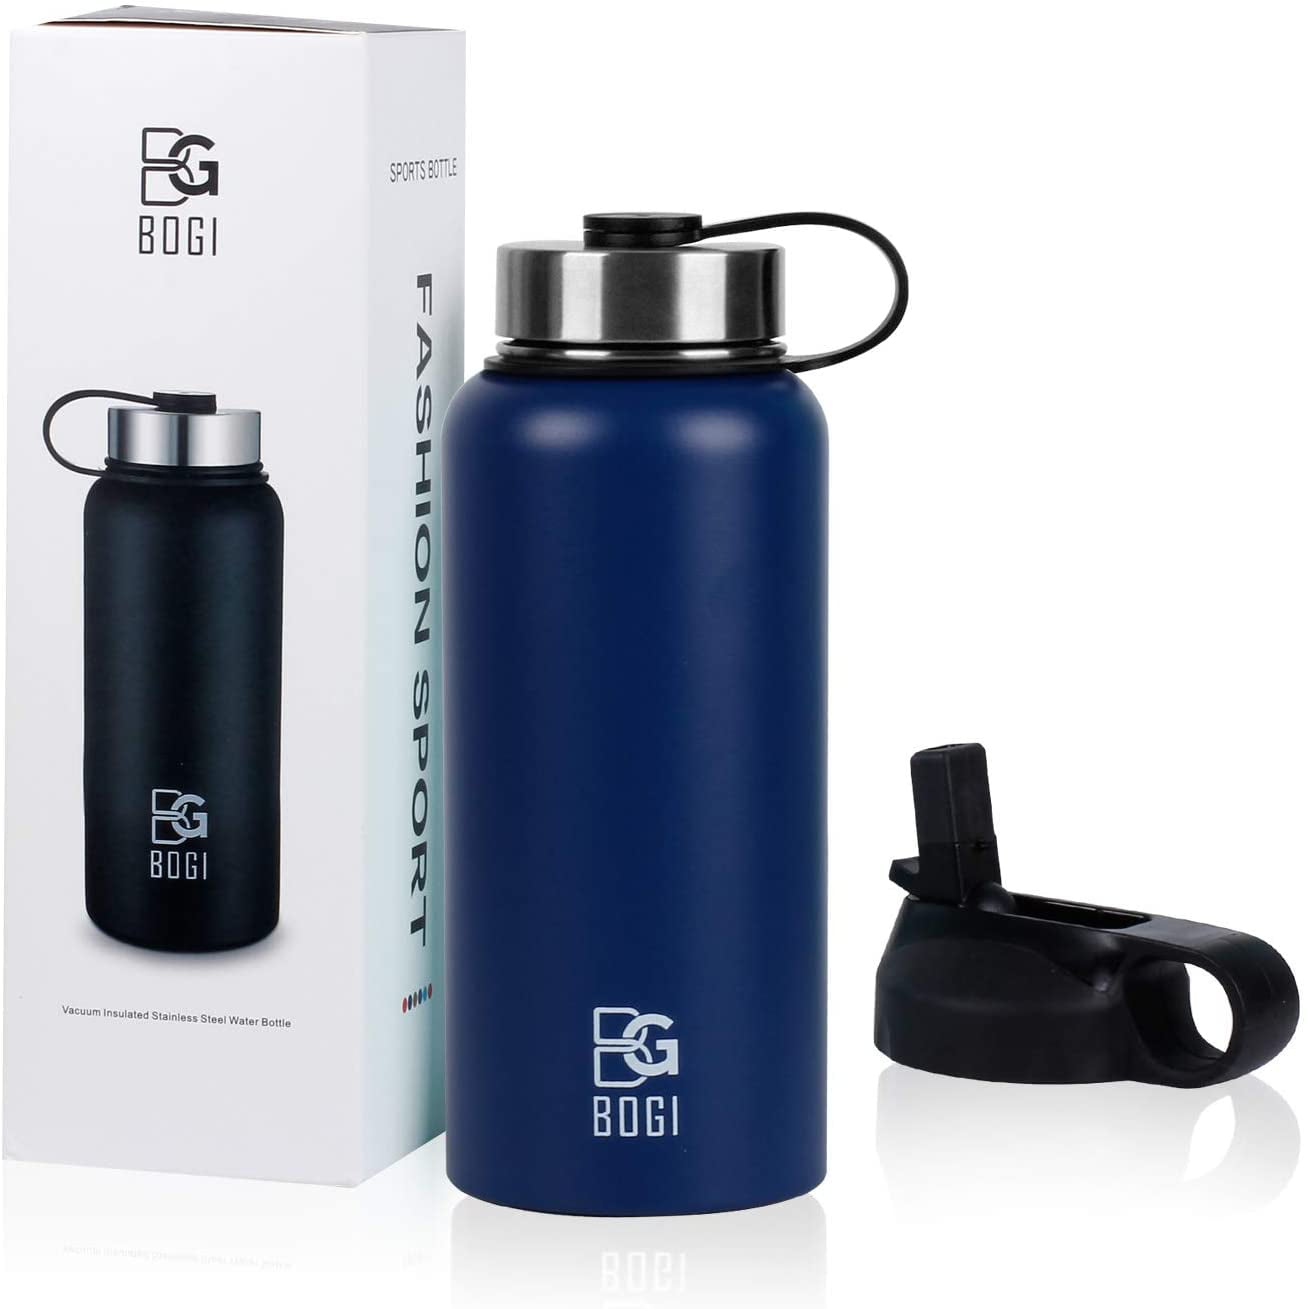 Double-Walled Stainless Steel Travel Mug Picnics BPA Free Driving Gym LuKe Vacuum Insulated Water Bottle Perfect for Camping Keeps Drinks Cold or Hot for 10+ Hours 